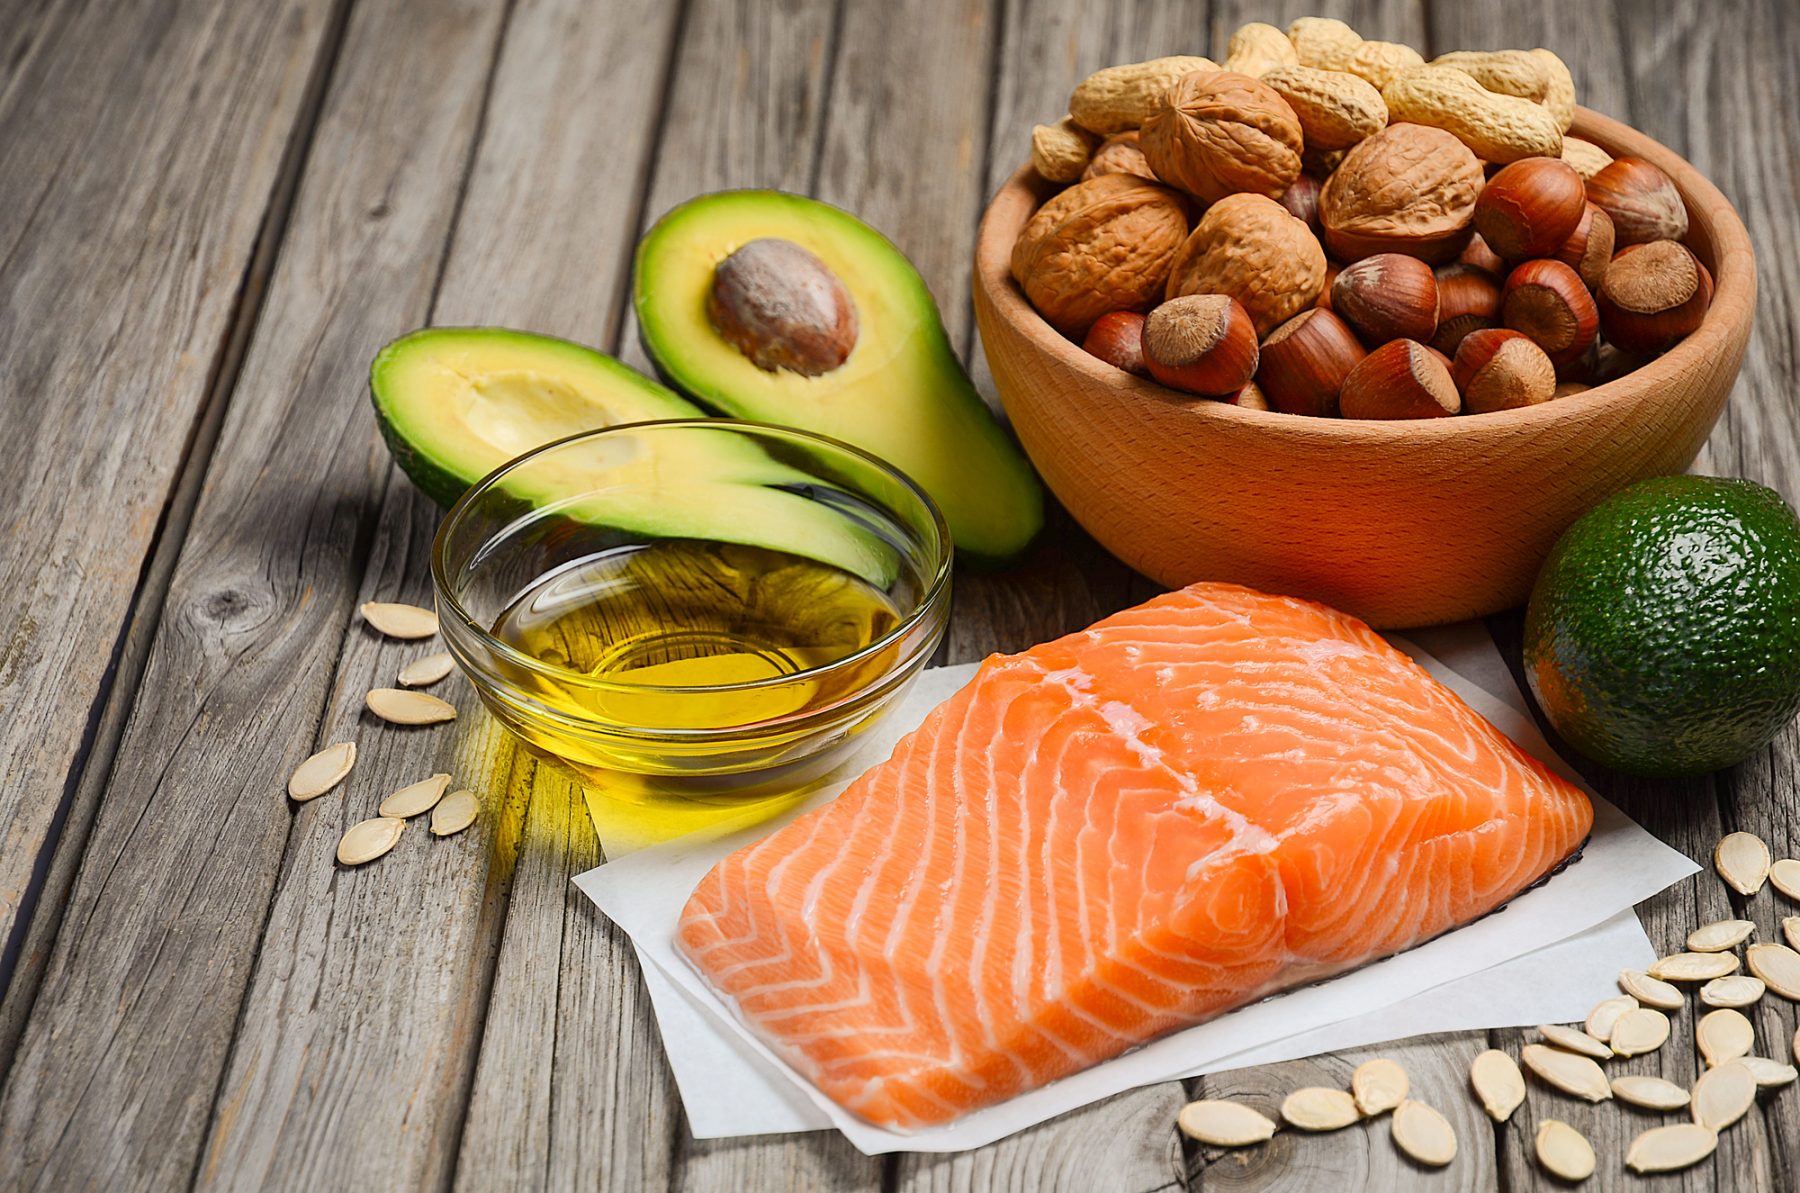 Omega 3 Fatty Acids, What You Need to Know- Rethink My Health Podcast Episode 2